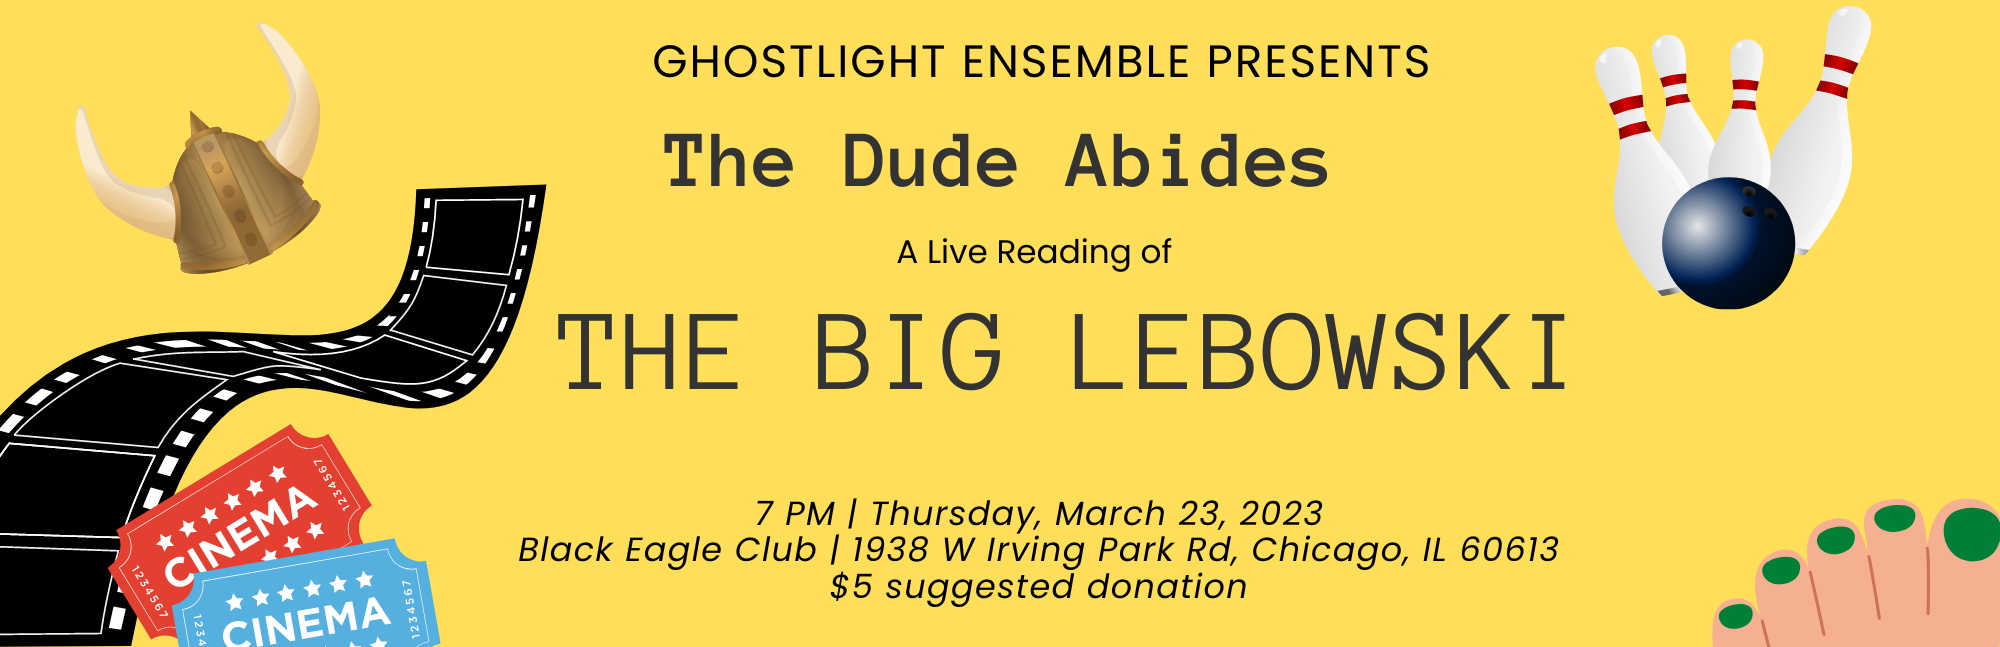 The Dude Abides: A Live Reading of The Big Lebowski.